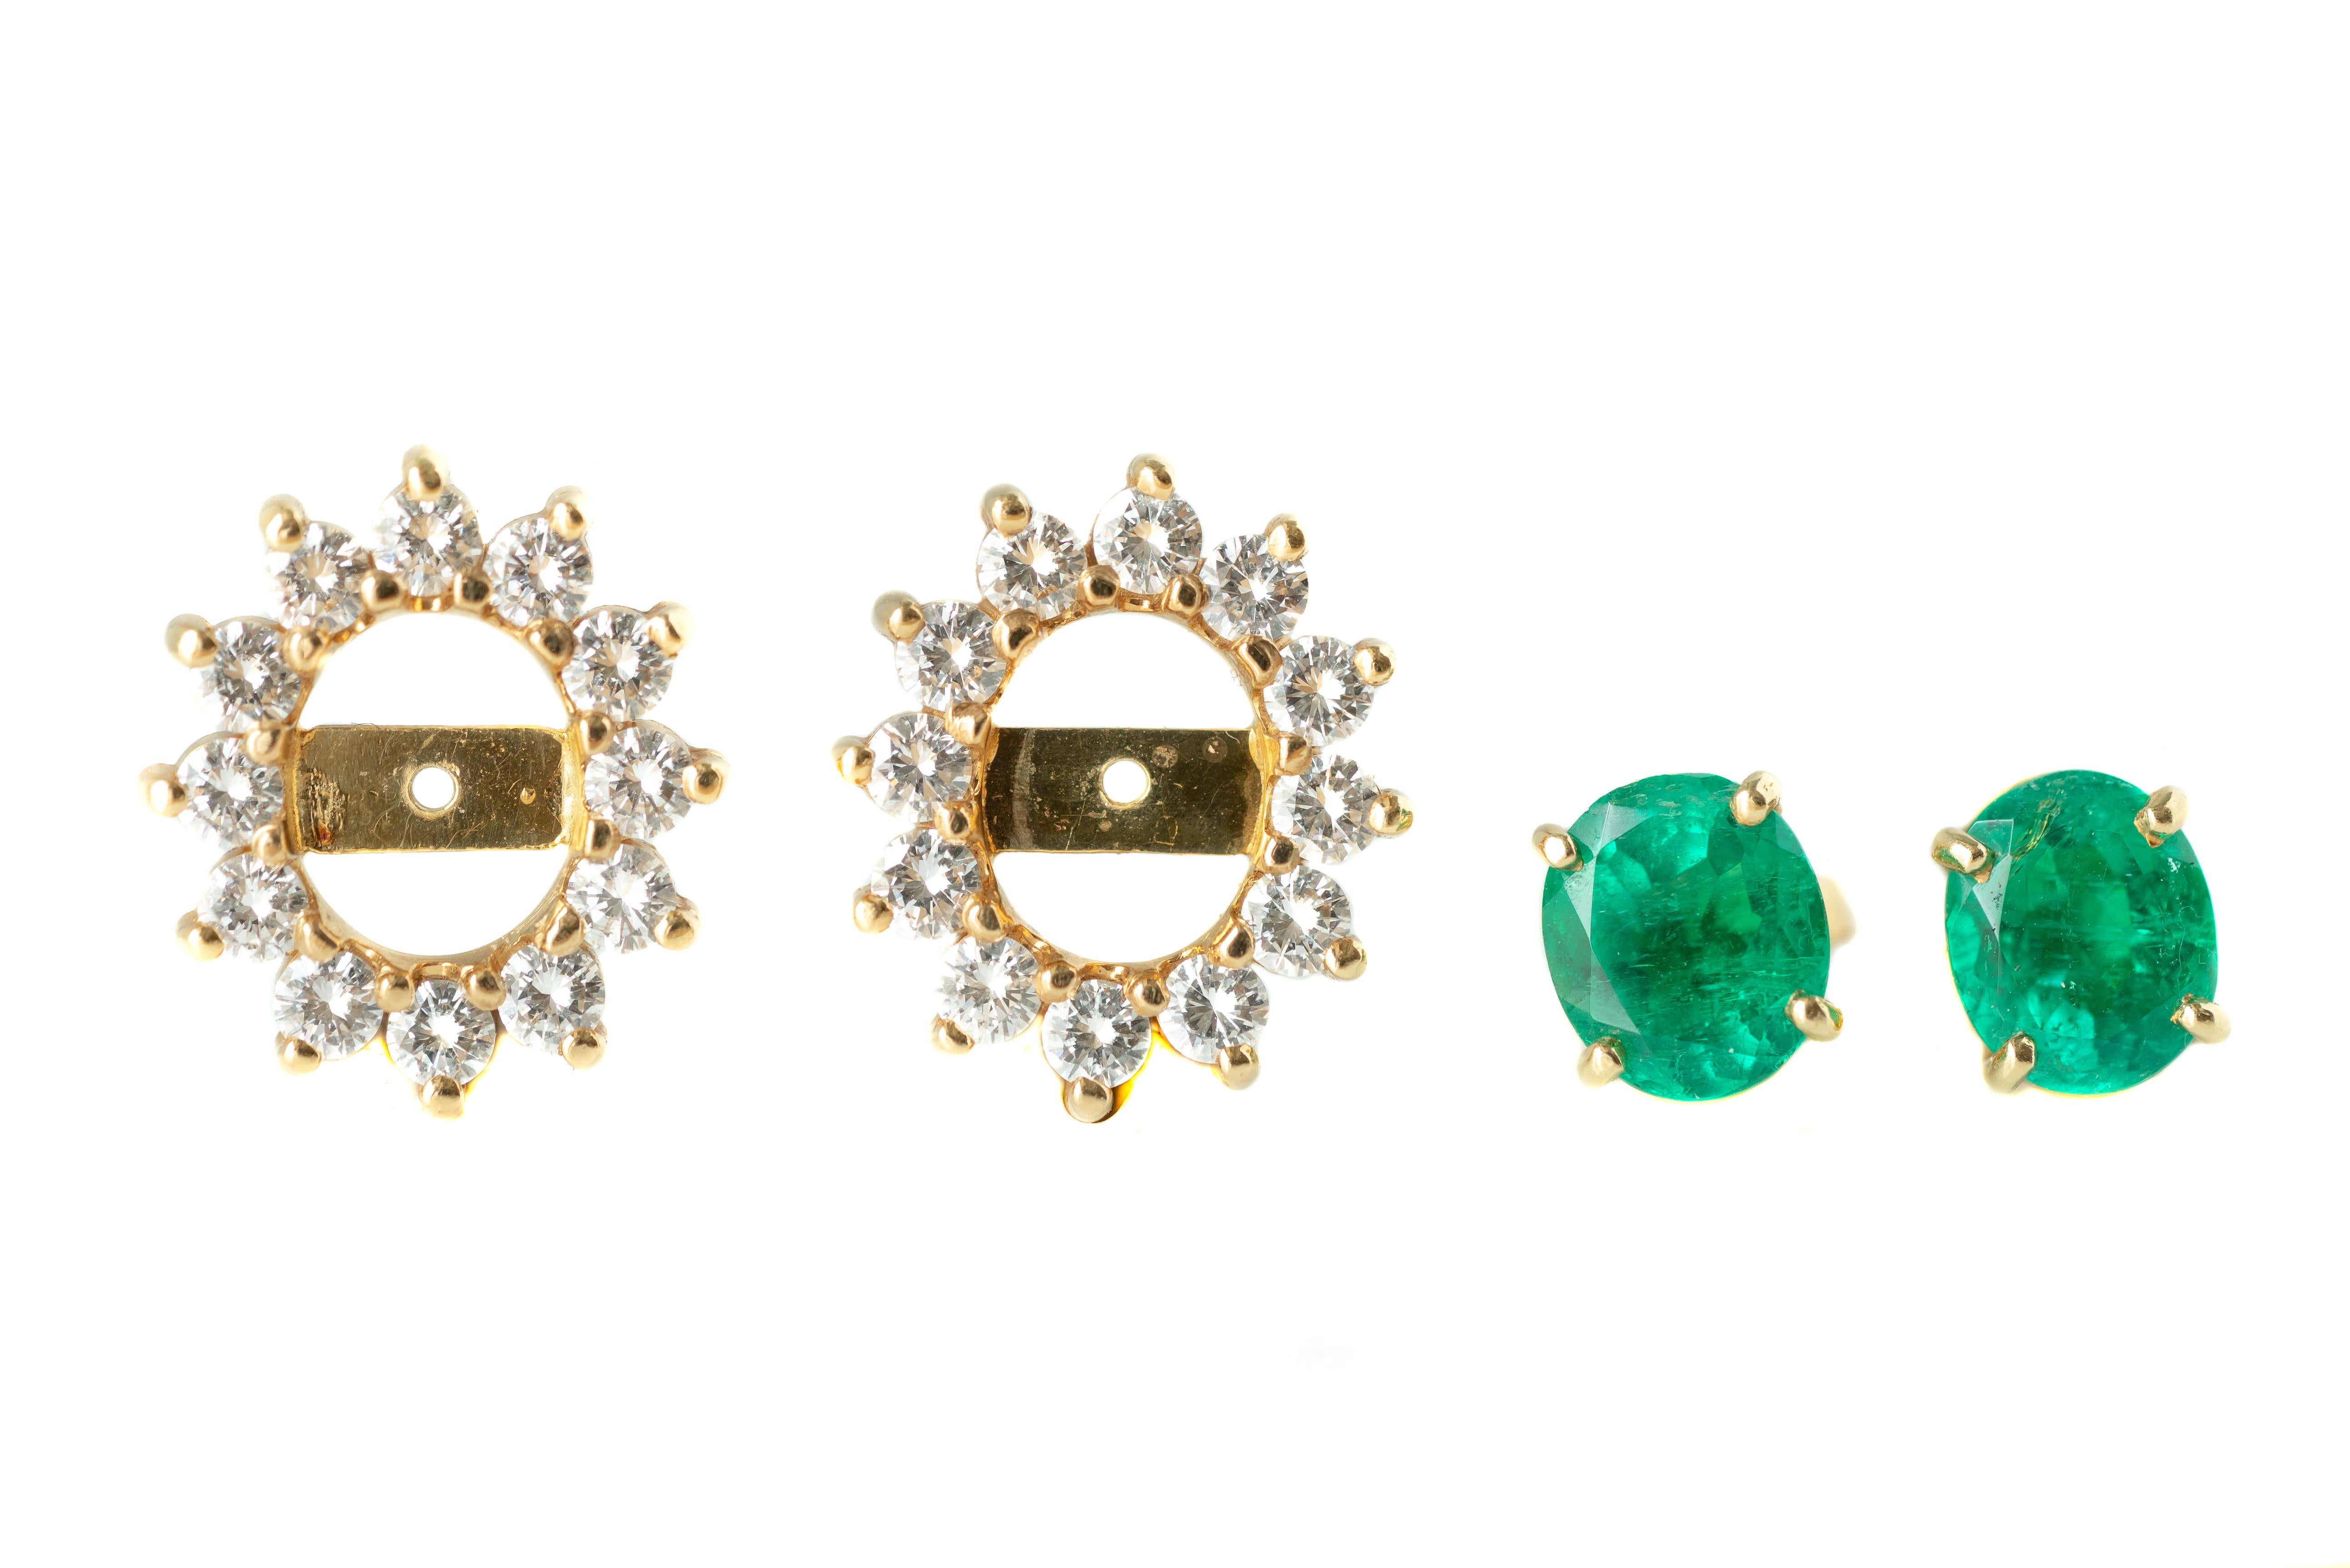 Contemporary 2 Carat Colombian Emerald Stud Earrings with 0.90 Carat Diamond Jackets For Sale